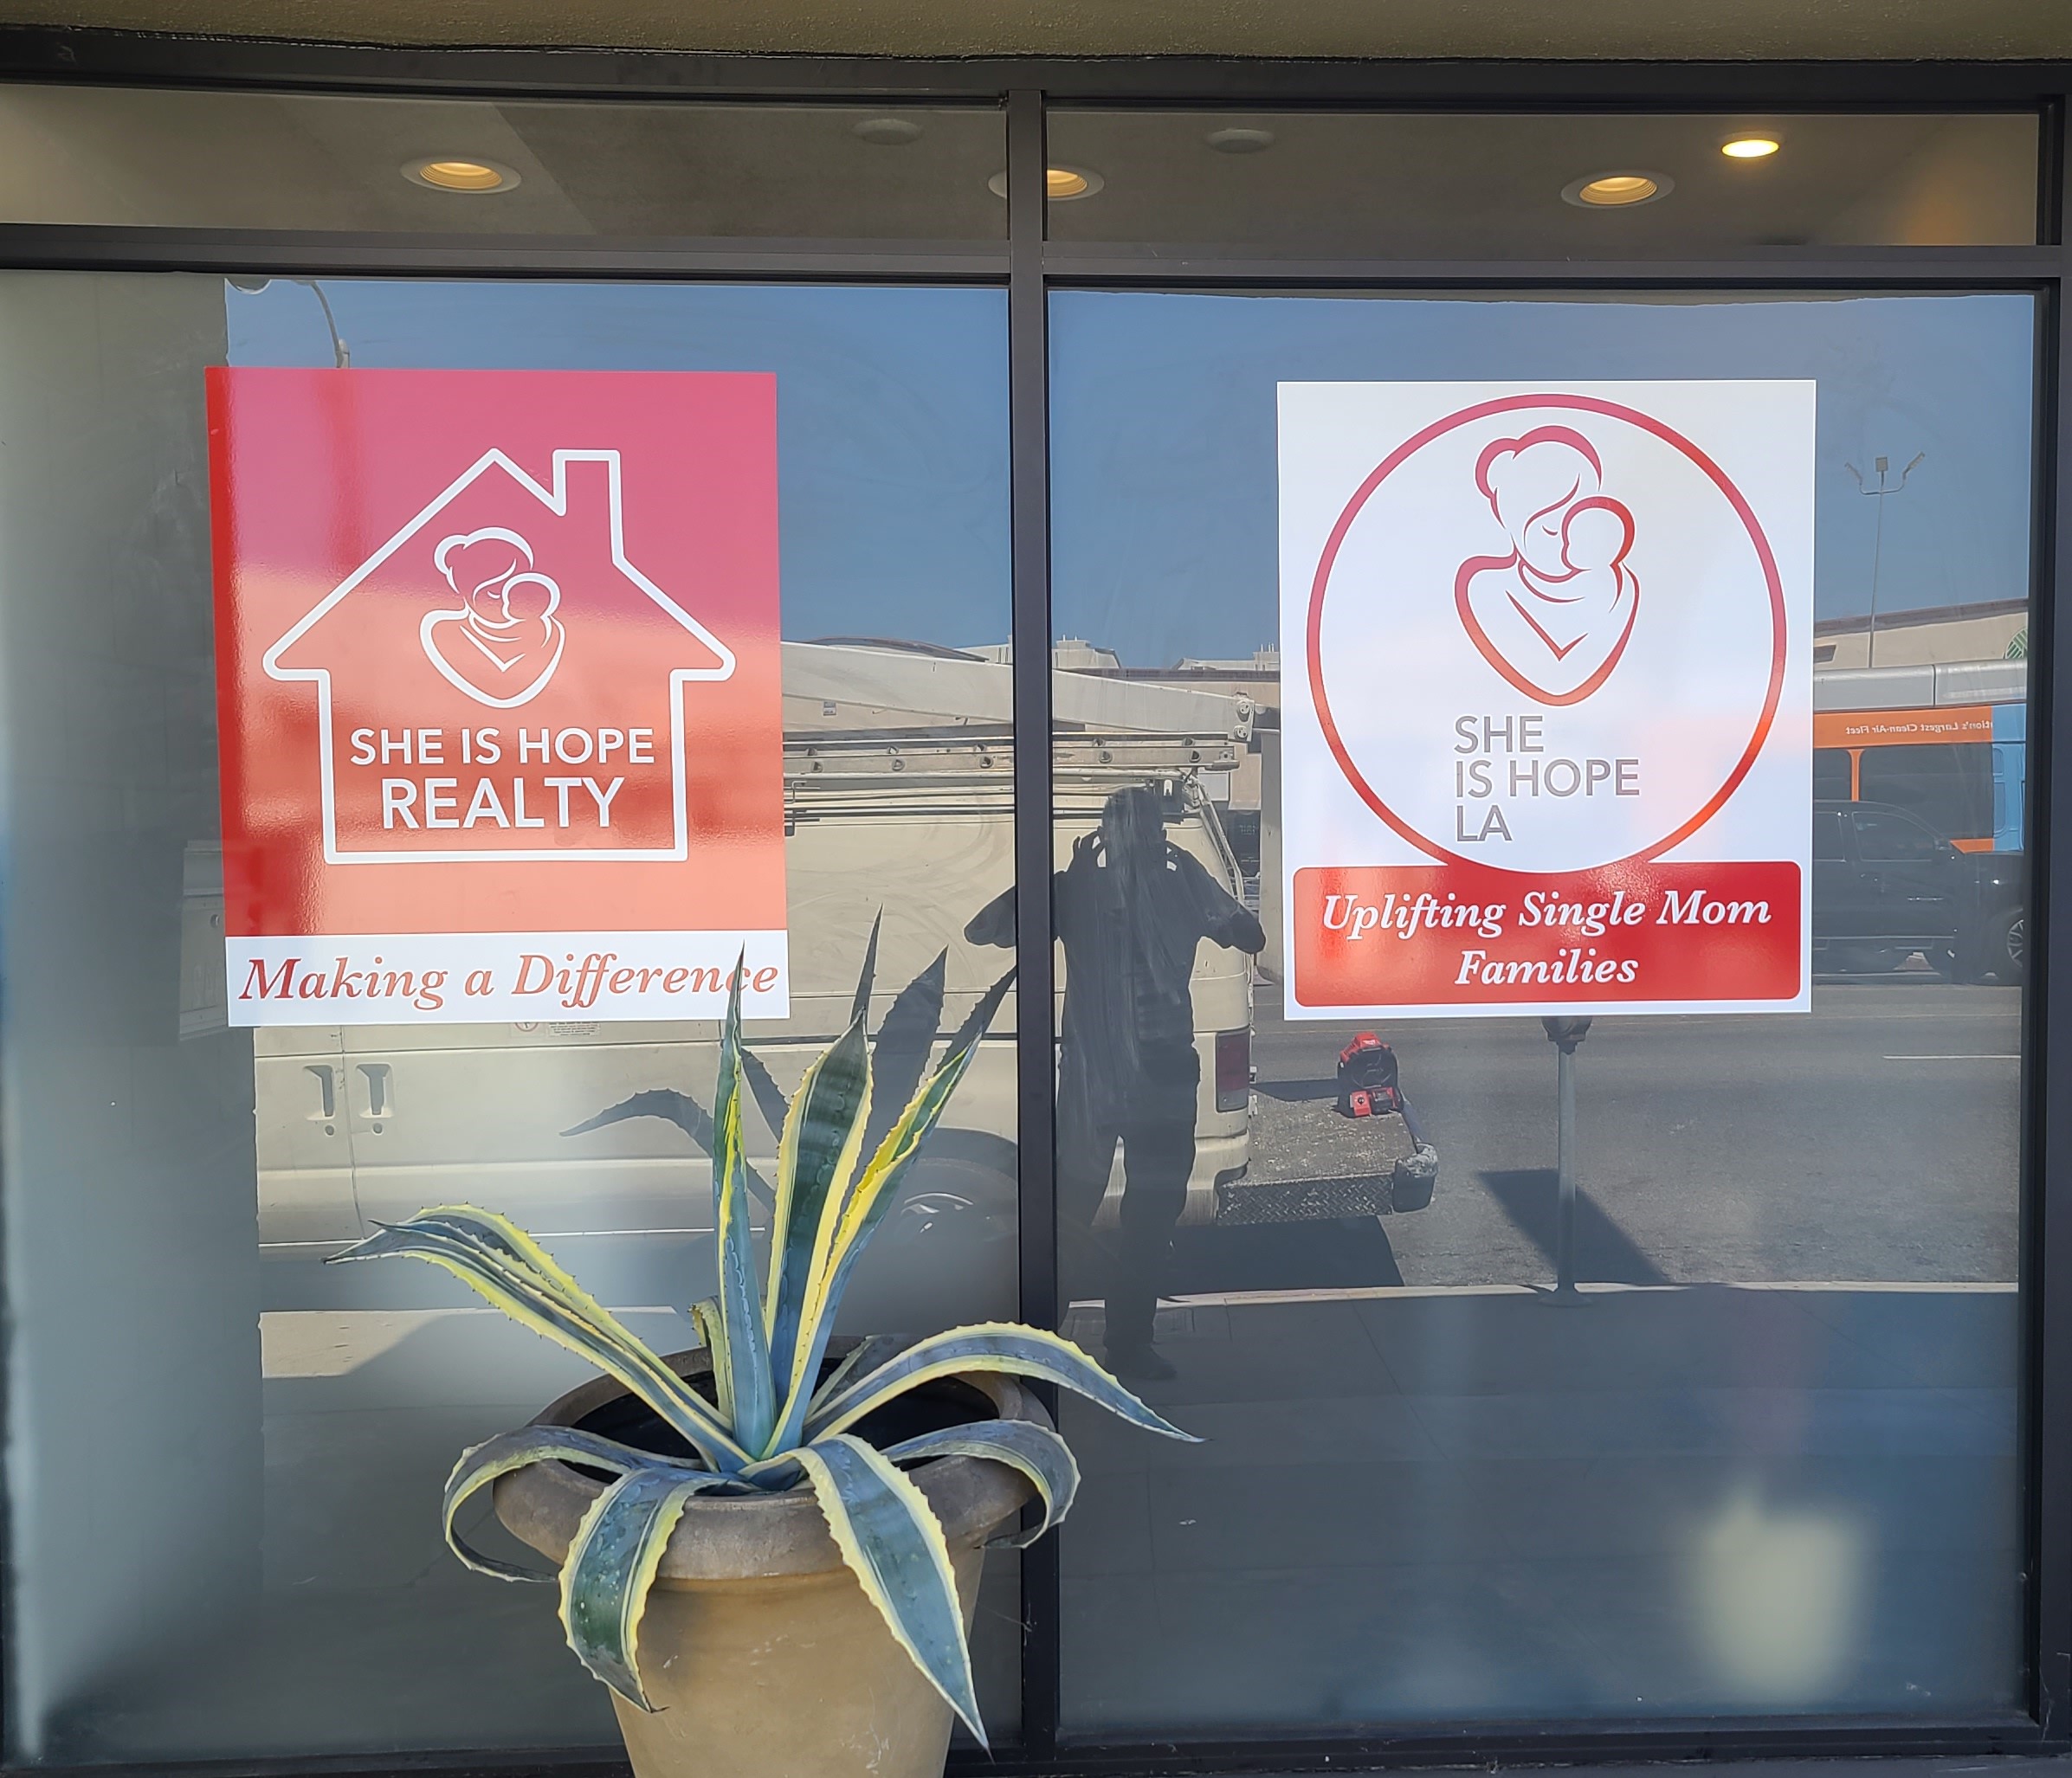 More from our sign package for She is Hope Realty, these window graphics adorn their Encino office entrance and display their brand to attract more clients.